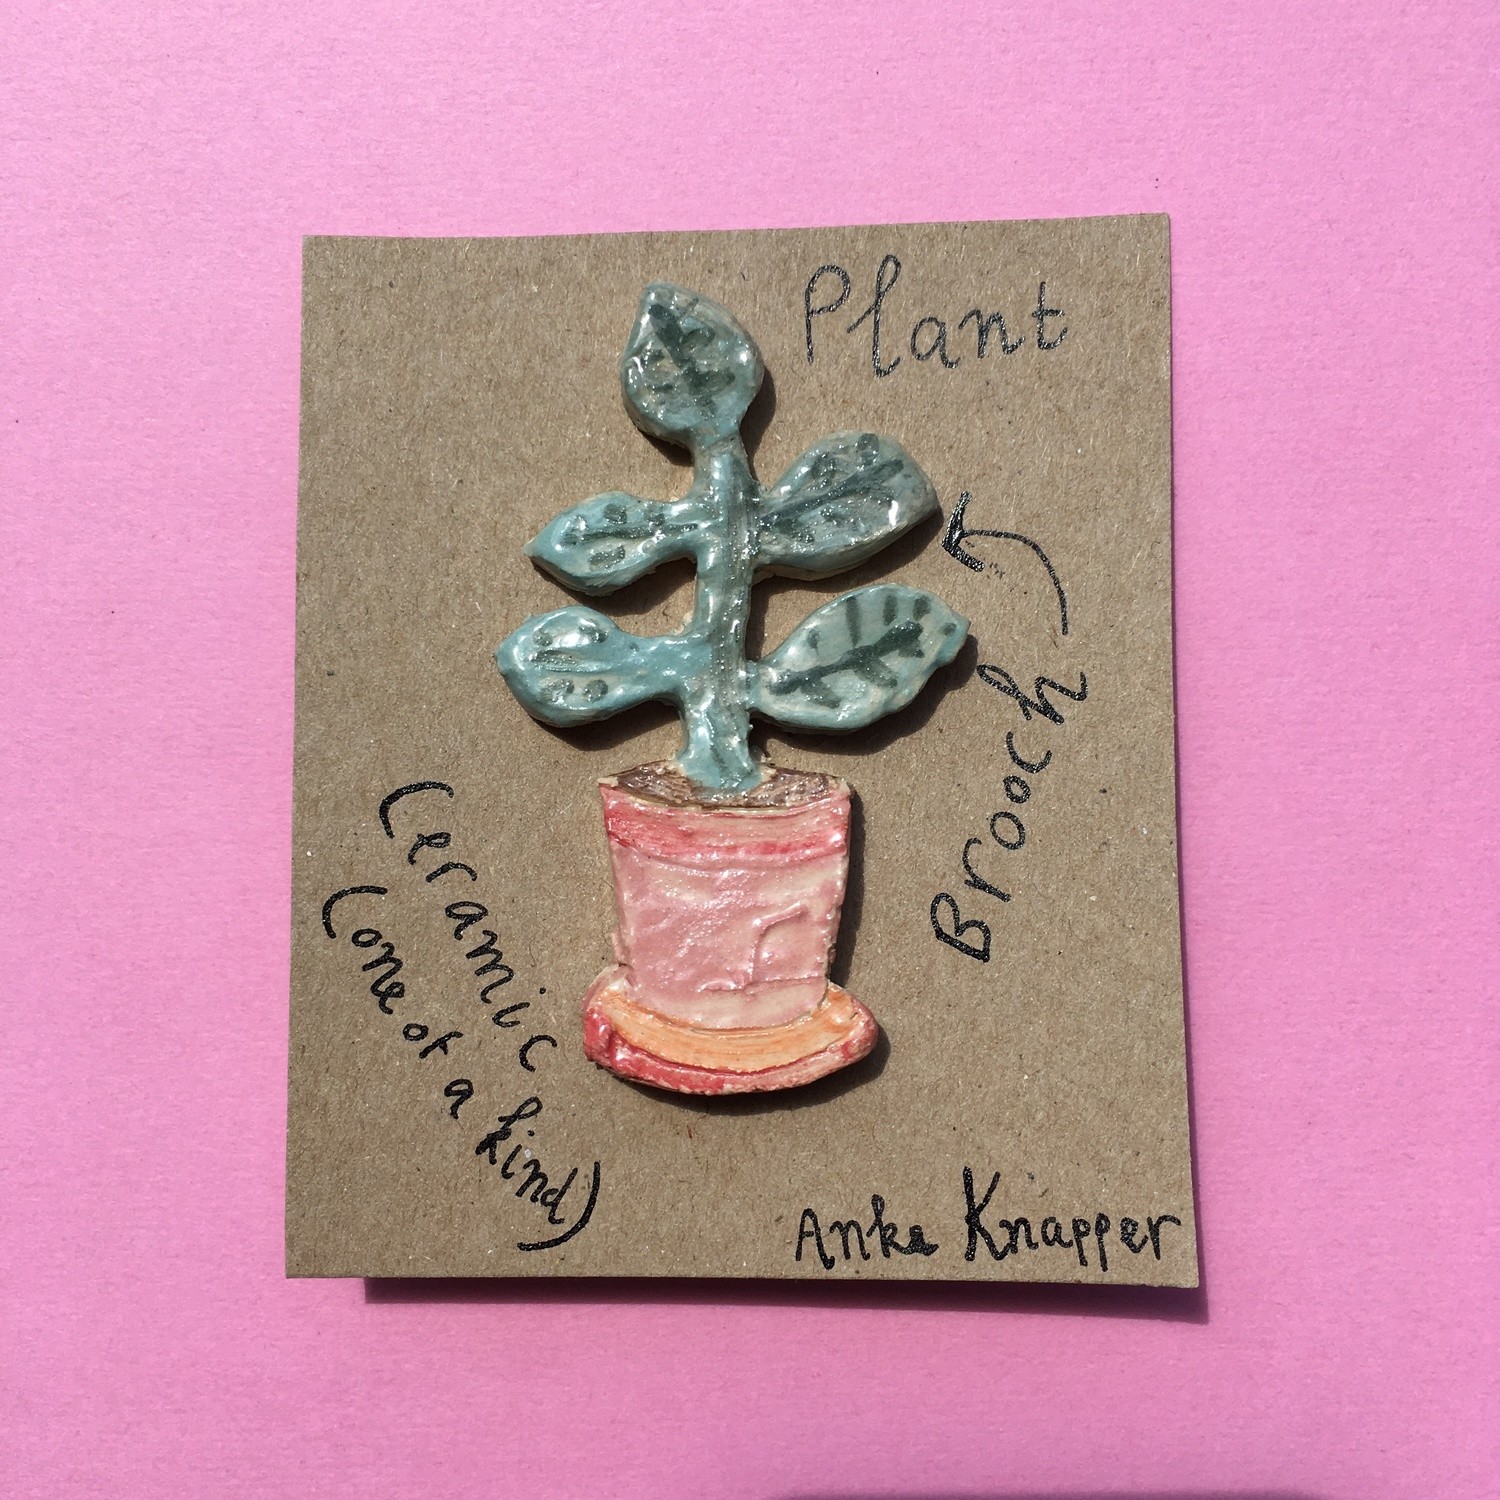 CERAMIC PLANT BROOCH
Shipping included!